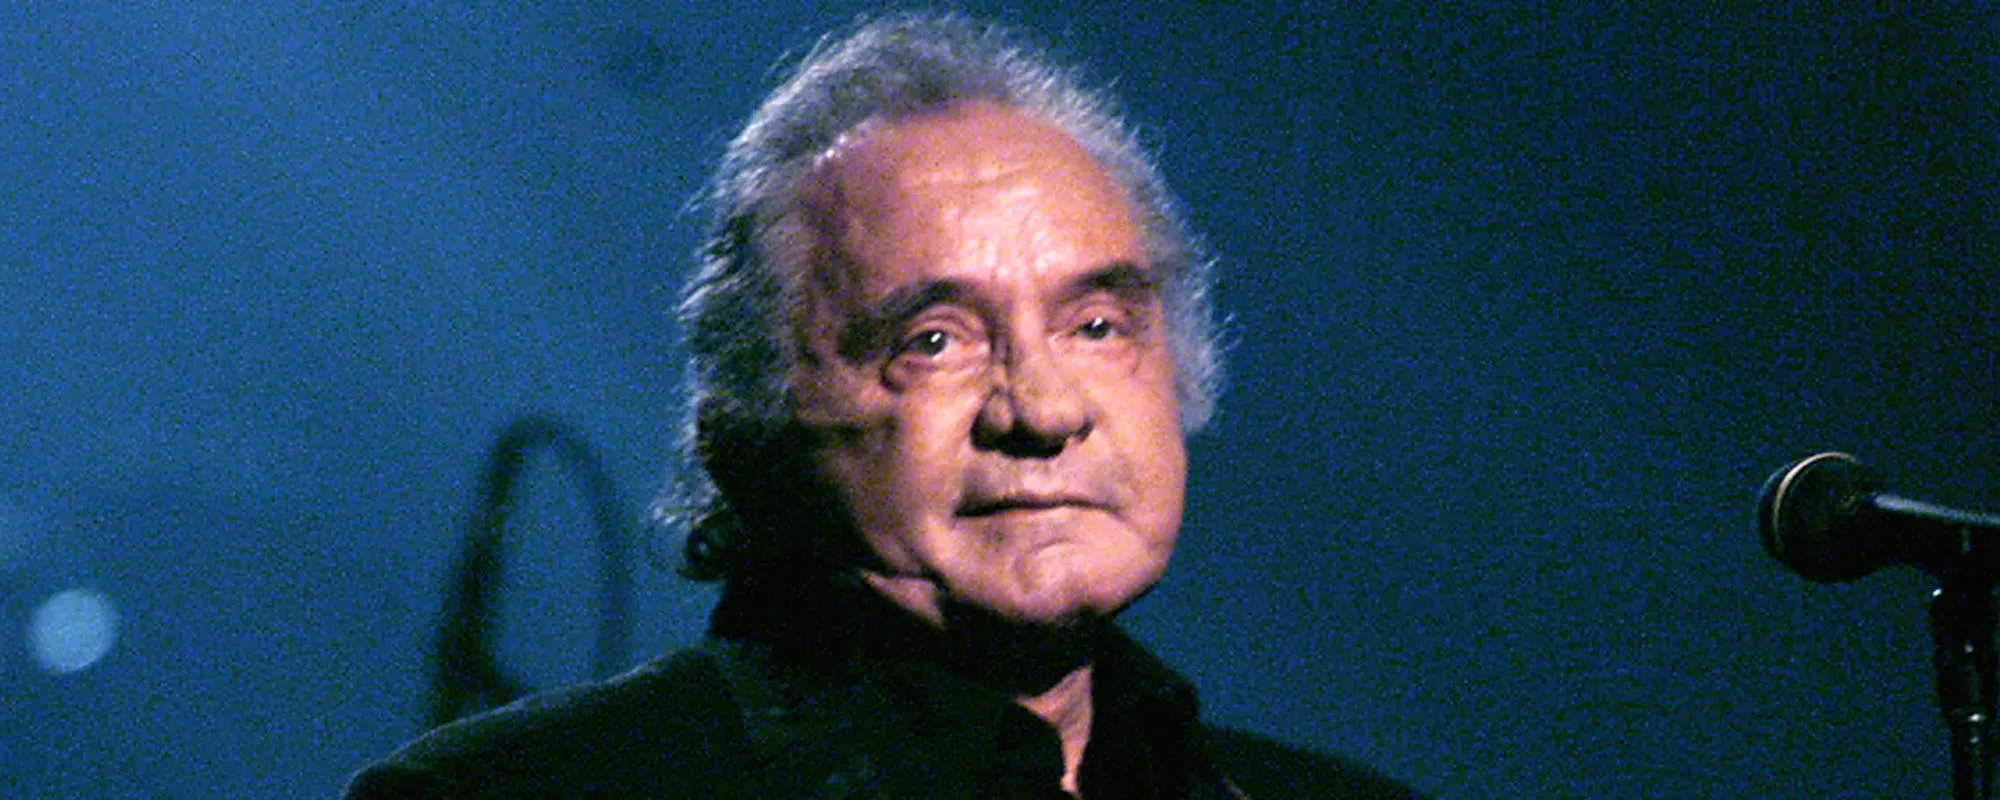 The Story Behind “Well Alright” by Johnny Cash and the Close Collaborators Who Reassembled for His Posthumous New Album